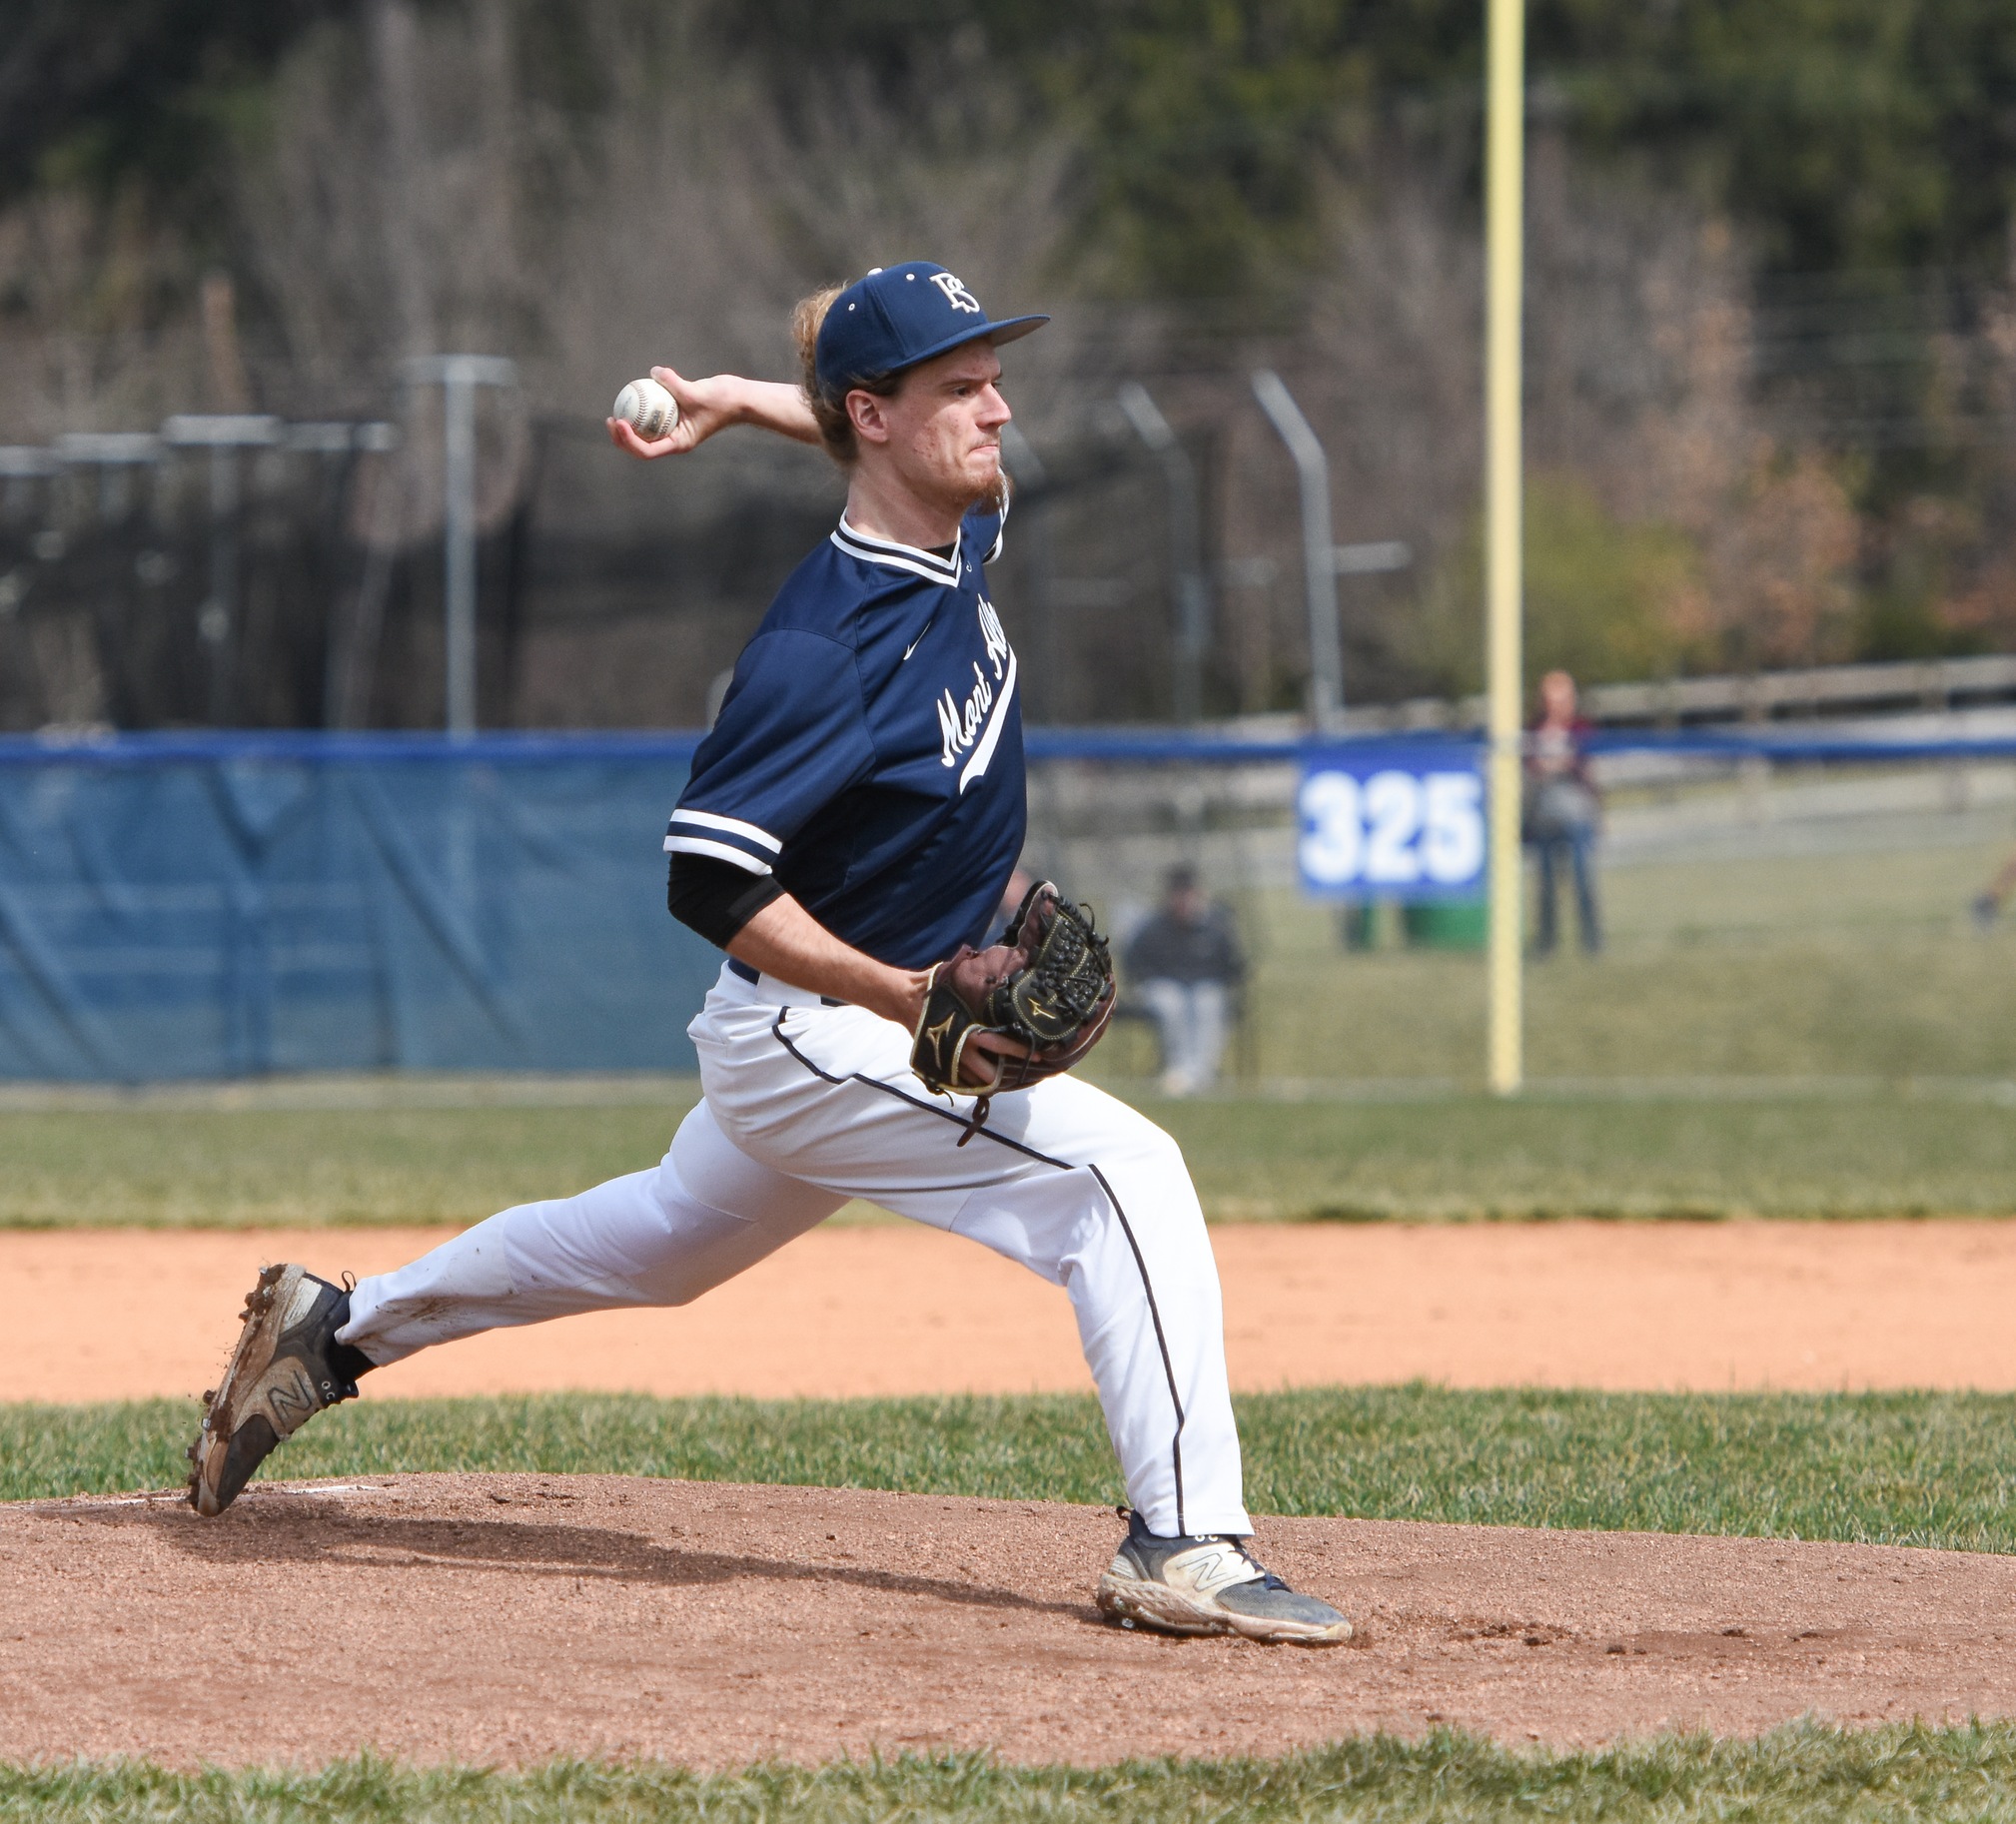 Mont Alto completes four game sweep of NK